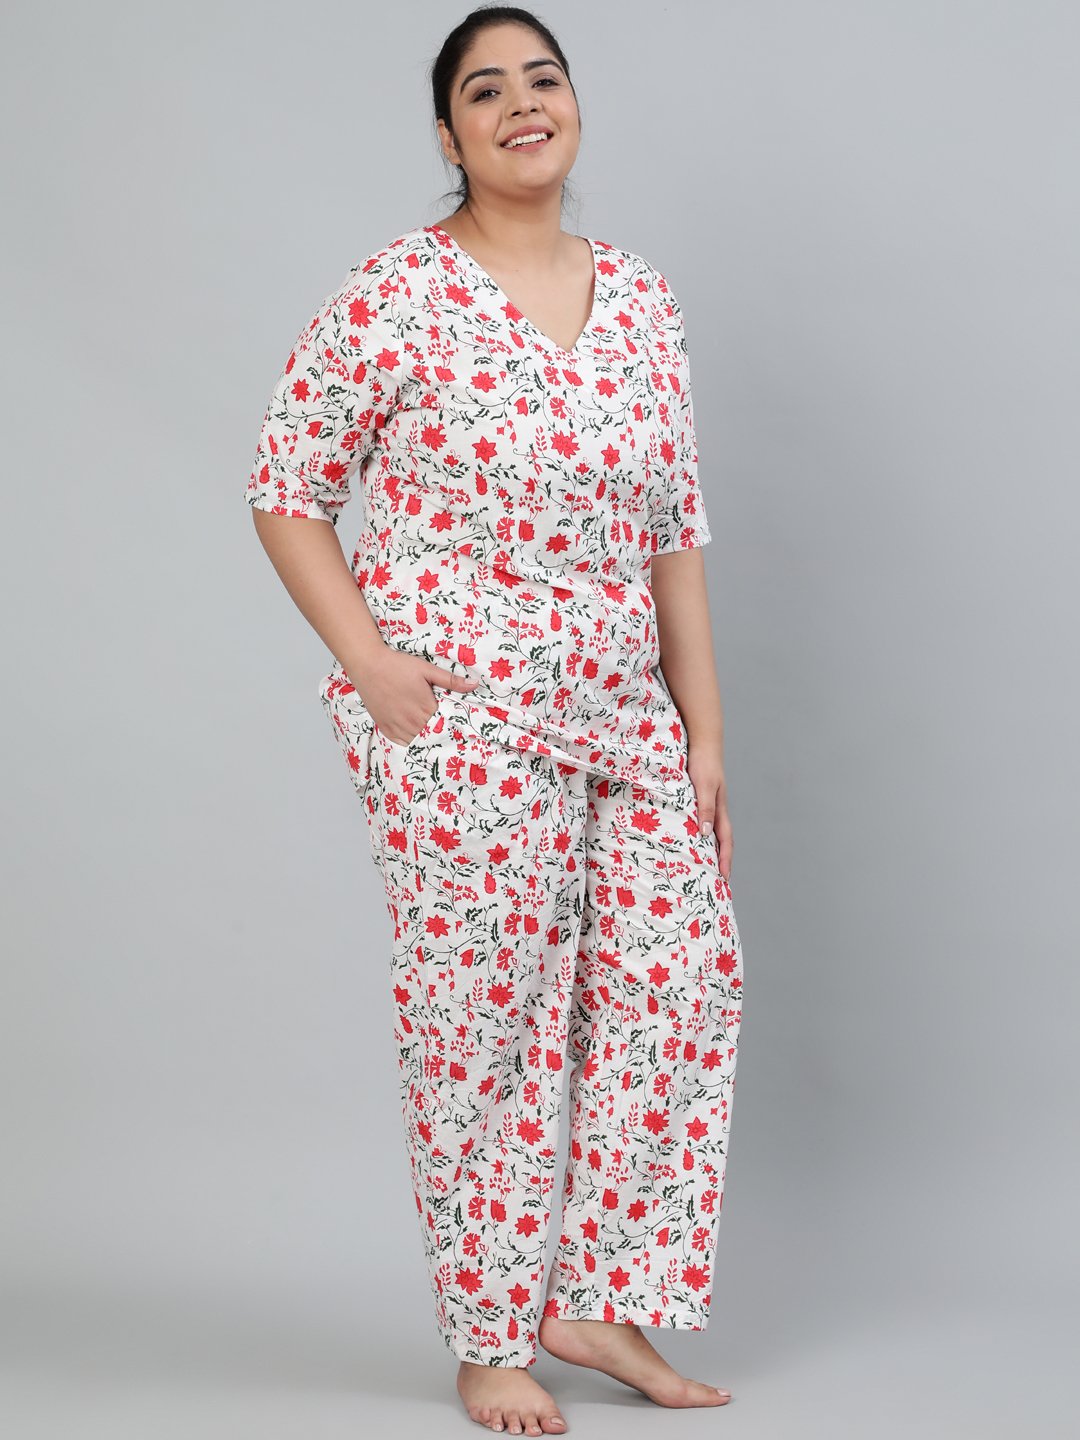 Women's Plus Size Off-White Floral Printed Night Suit With Half Sleeves - Nayo Clothing